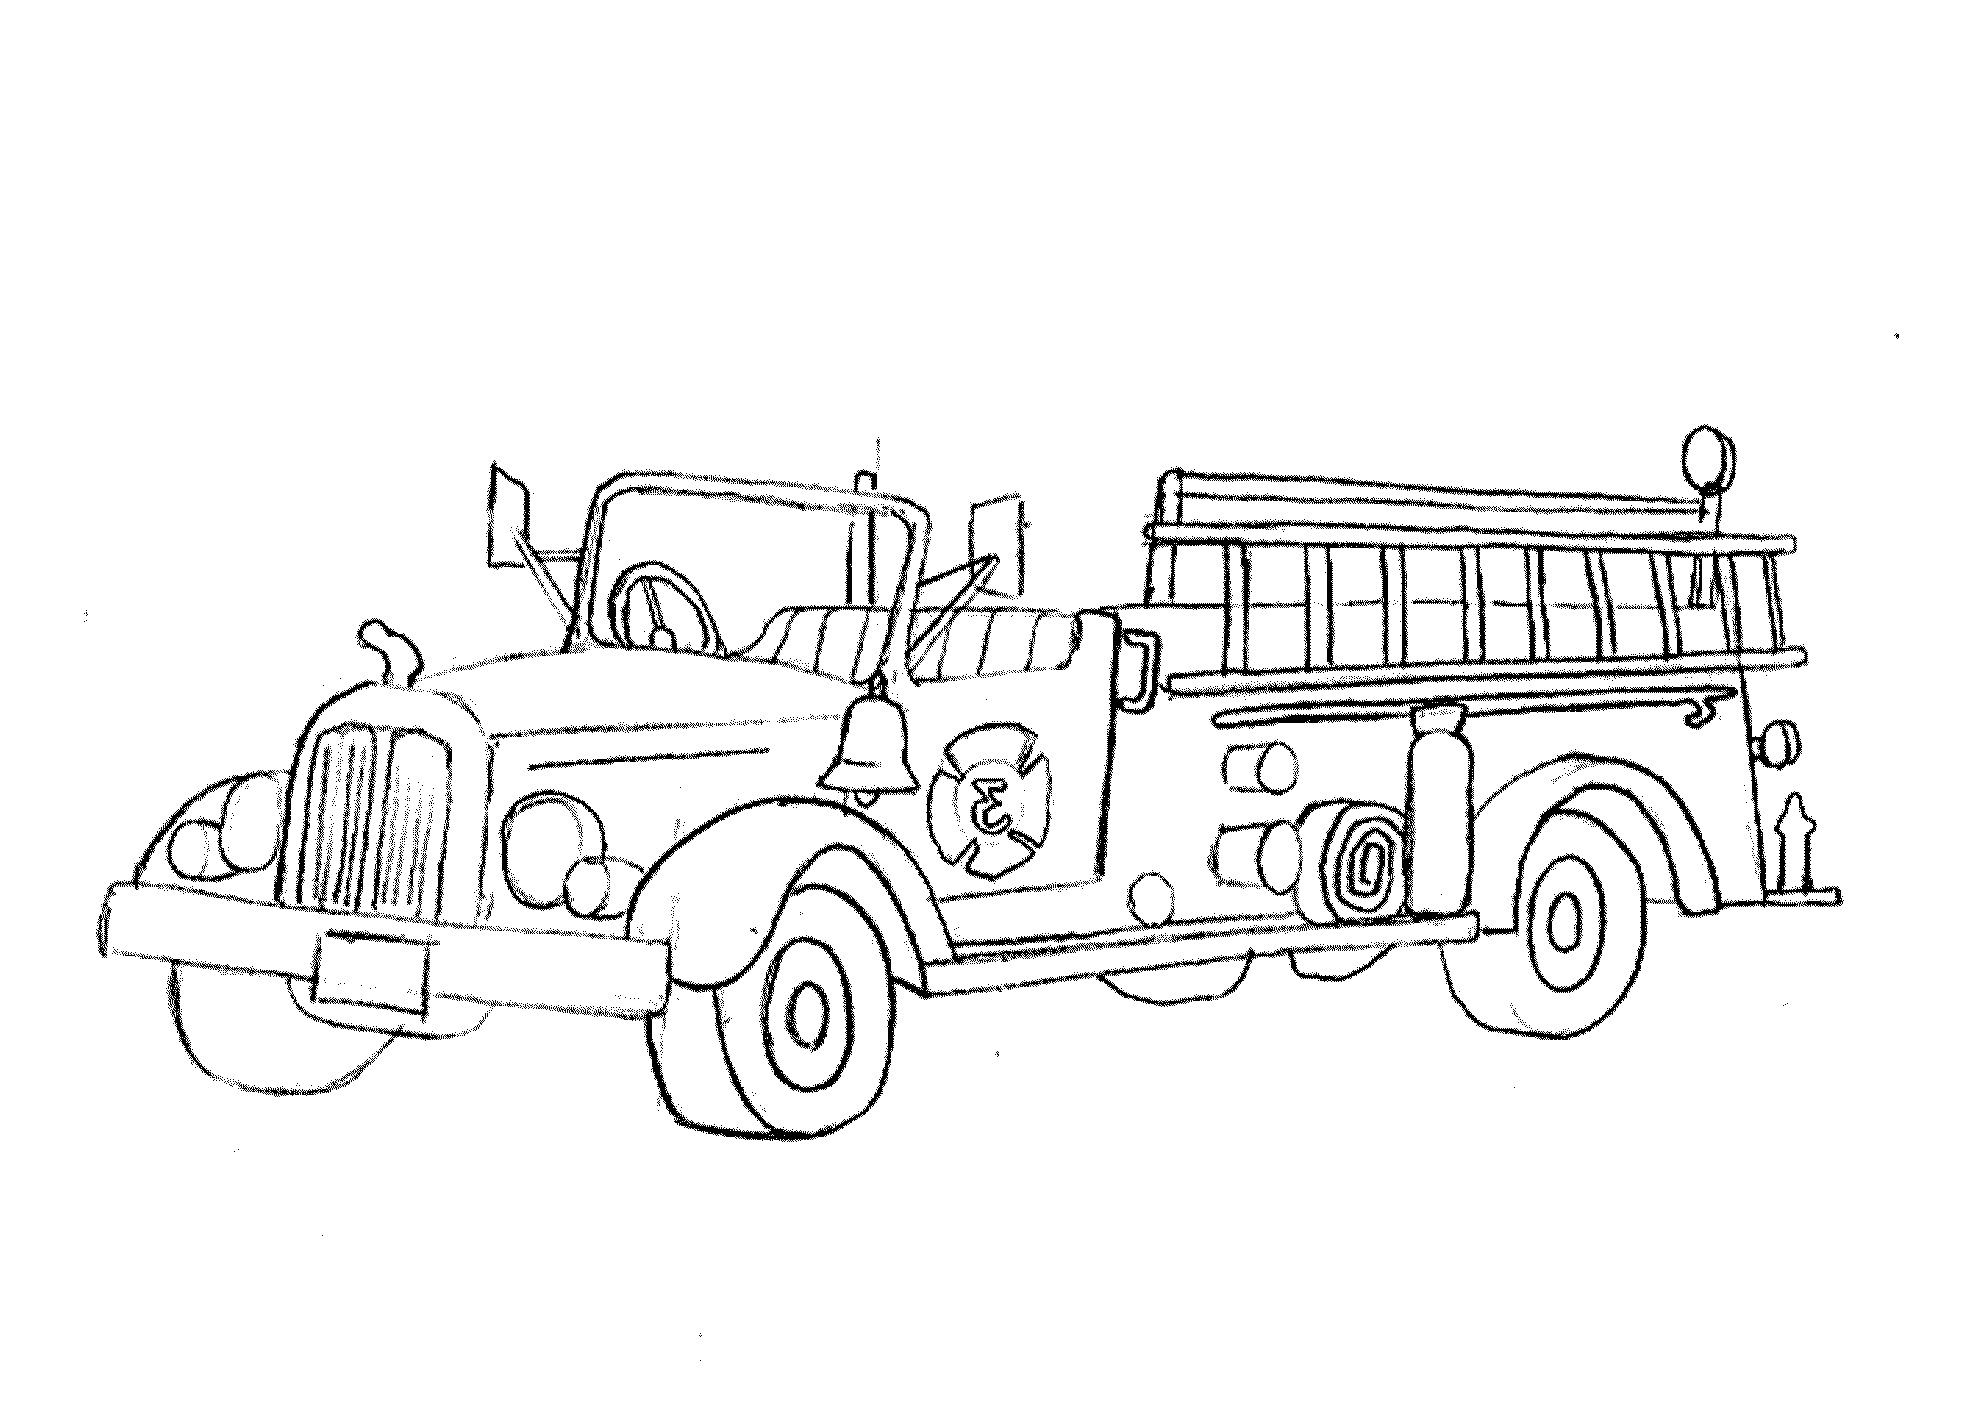 Download Print & Download - Educational Fire Truck Coloring Pages Giving Three in One Benefit